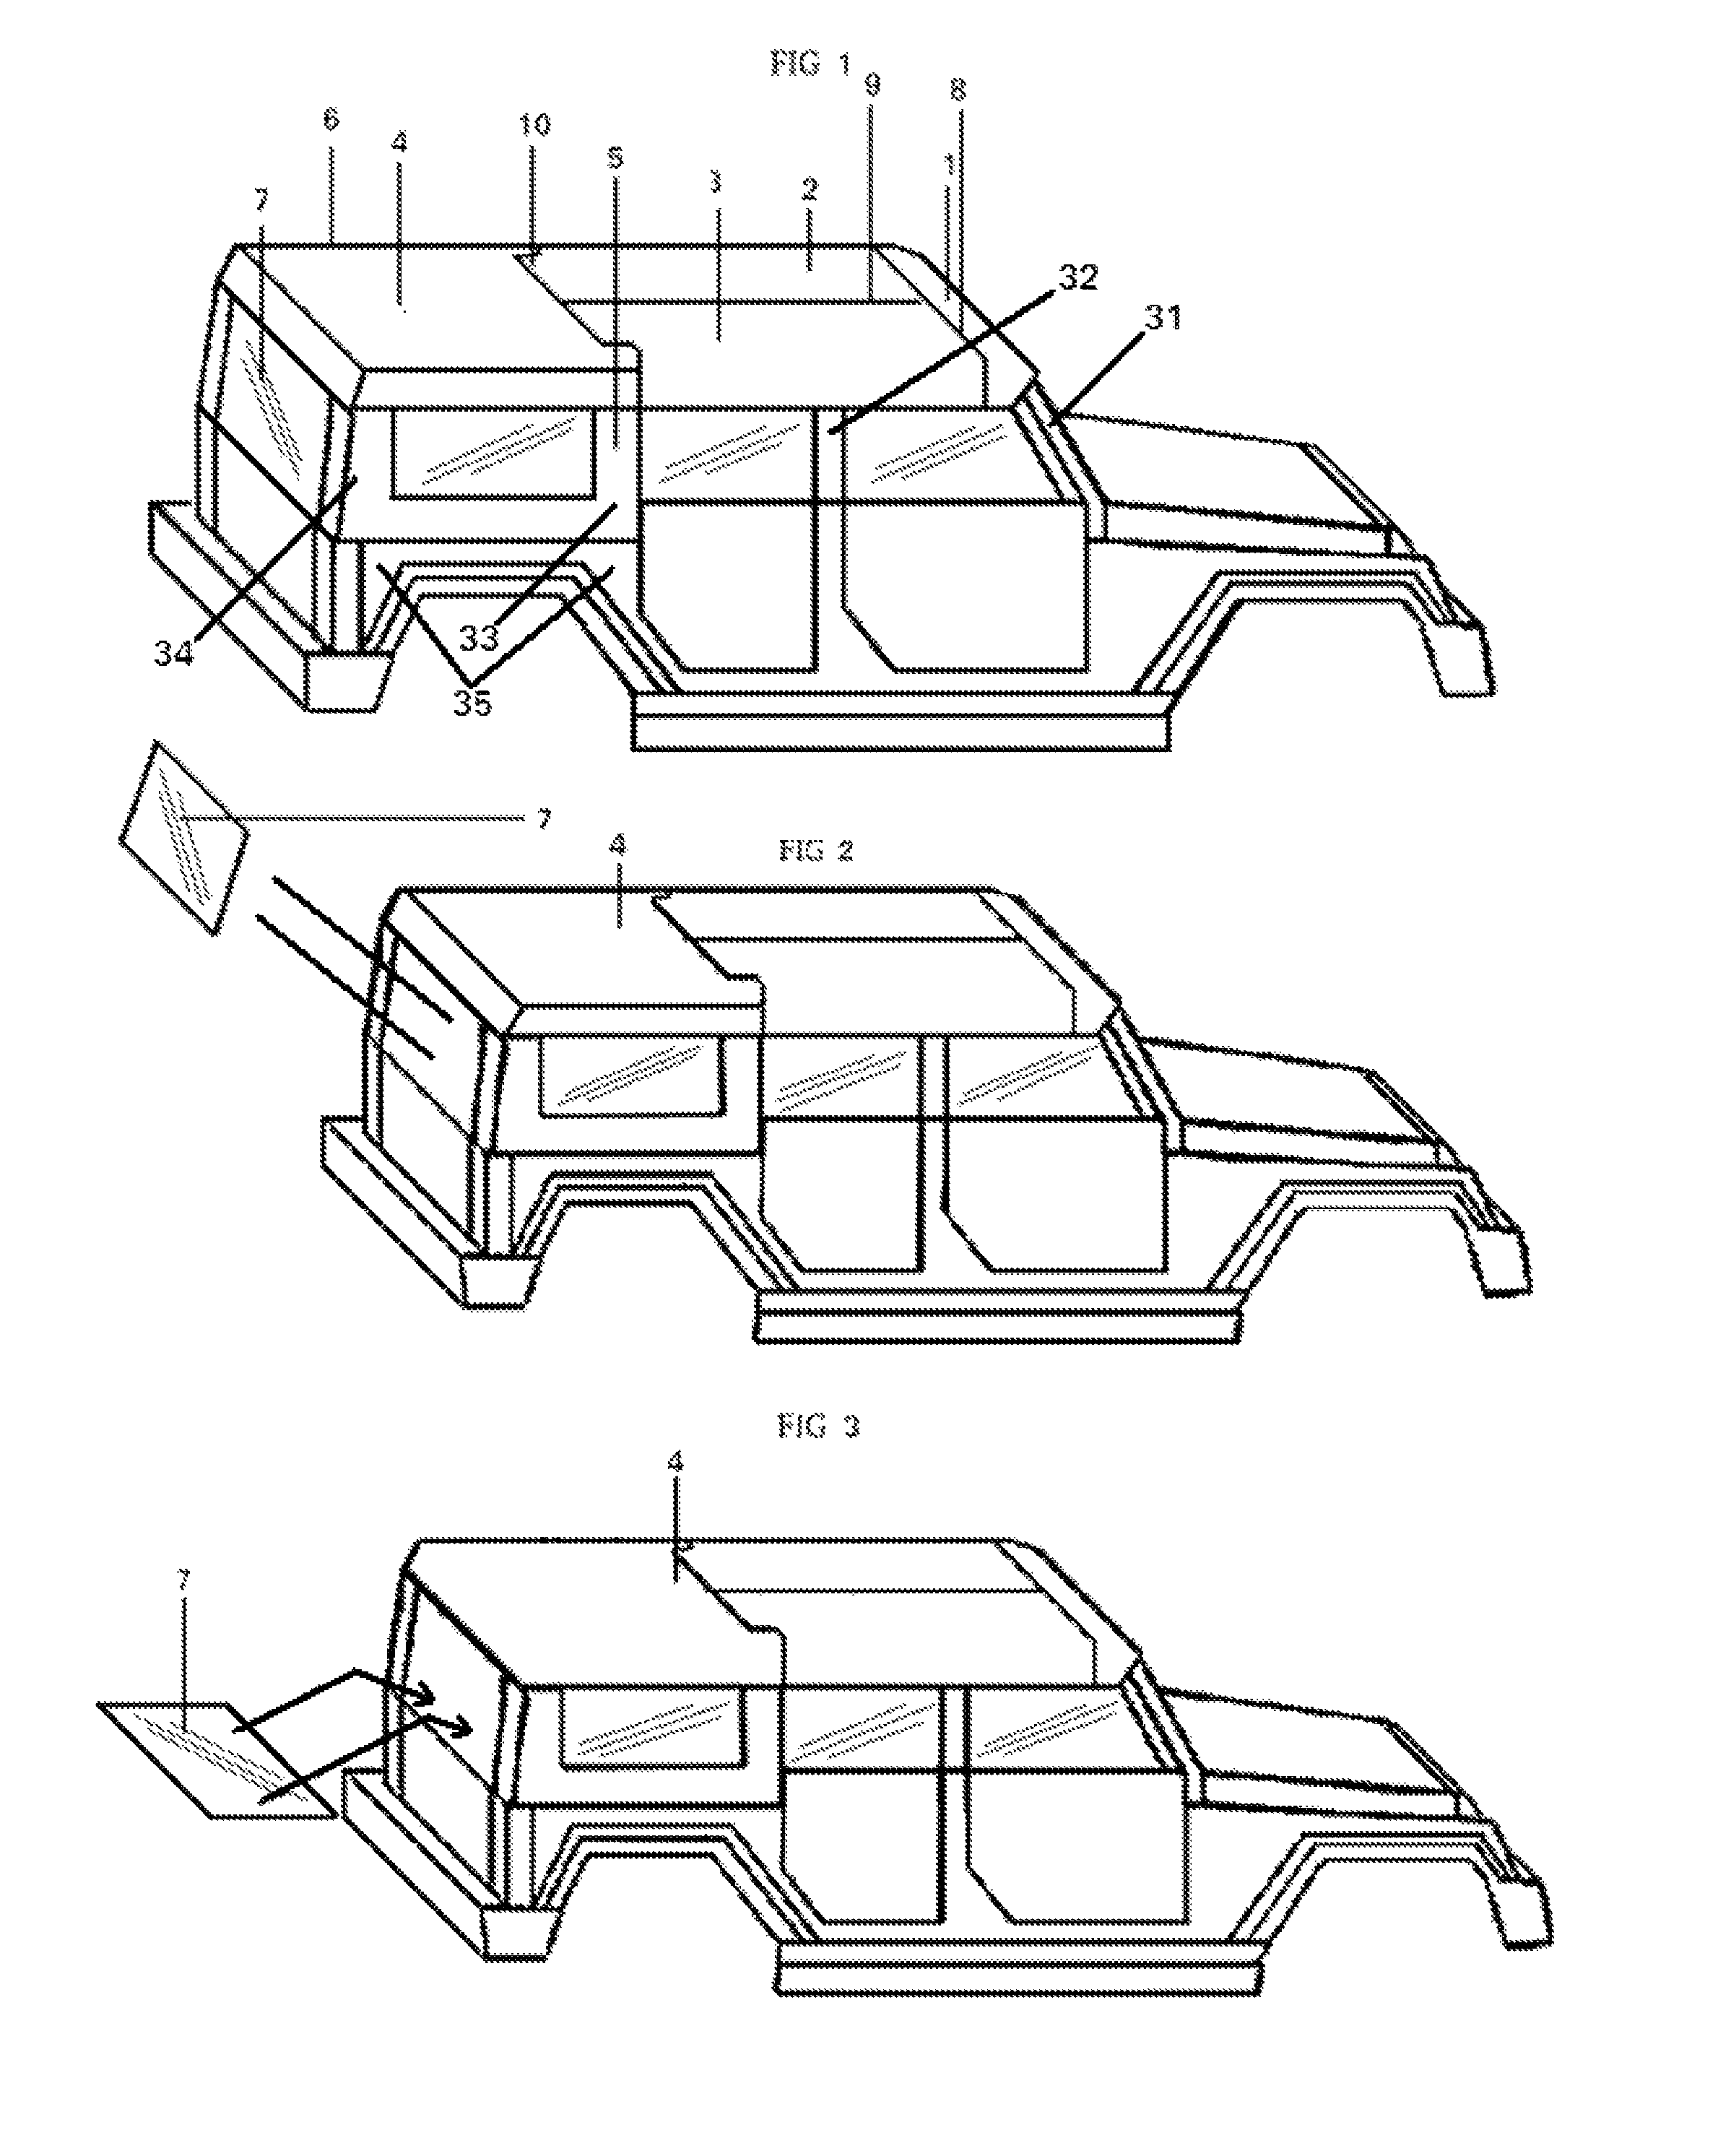 Vehicle with multiple elevation removable hard top and secure storage underneath